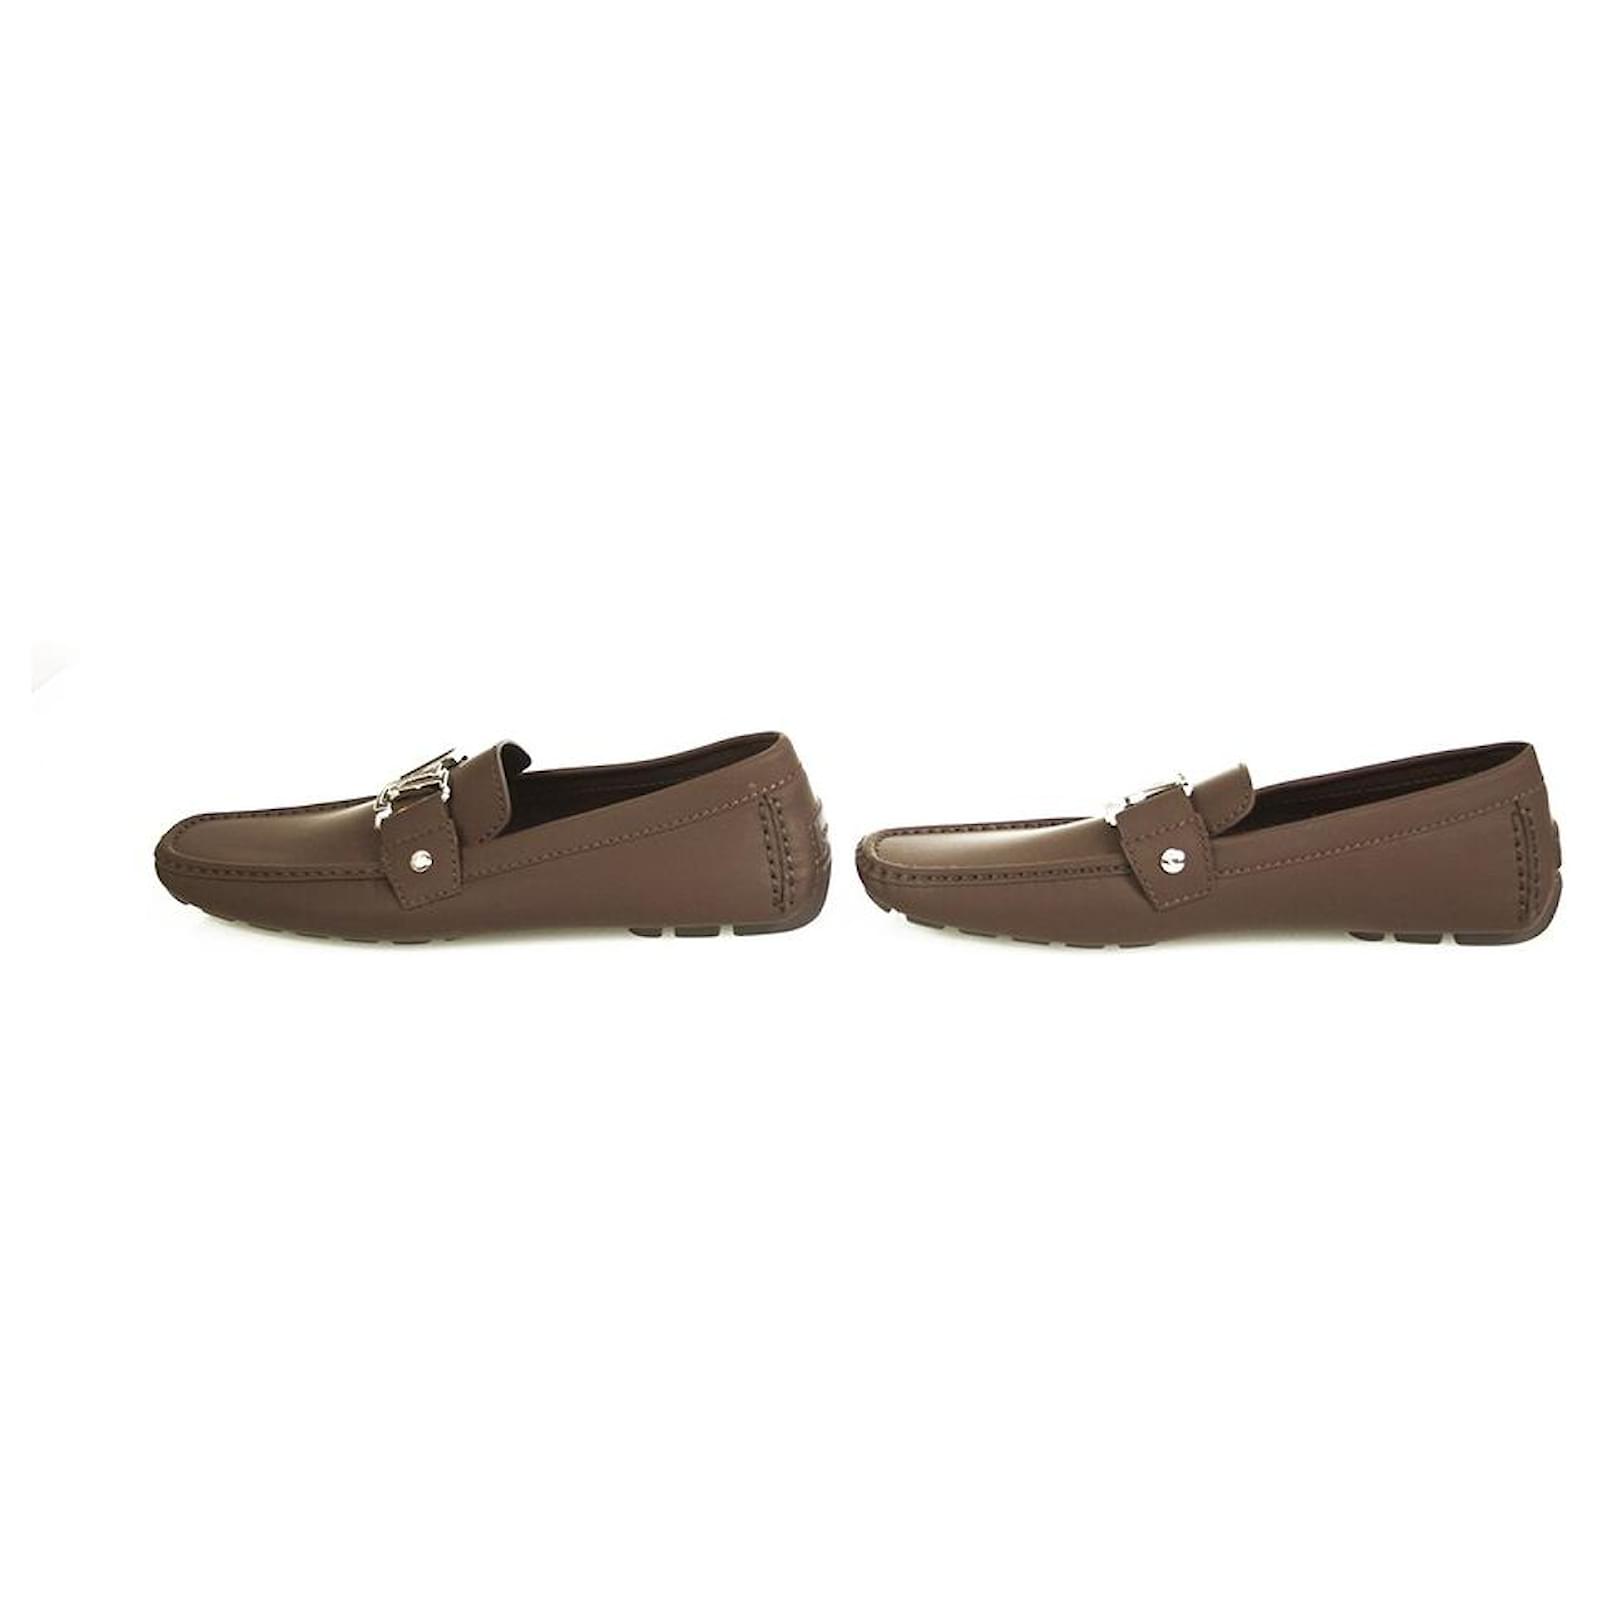 Monte carlo leather flats Louis Vuitton Brown size 41 EU in Leather -  8432872